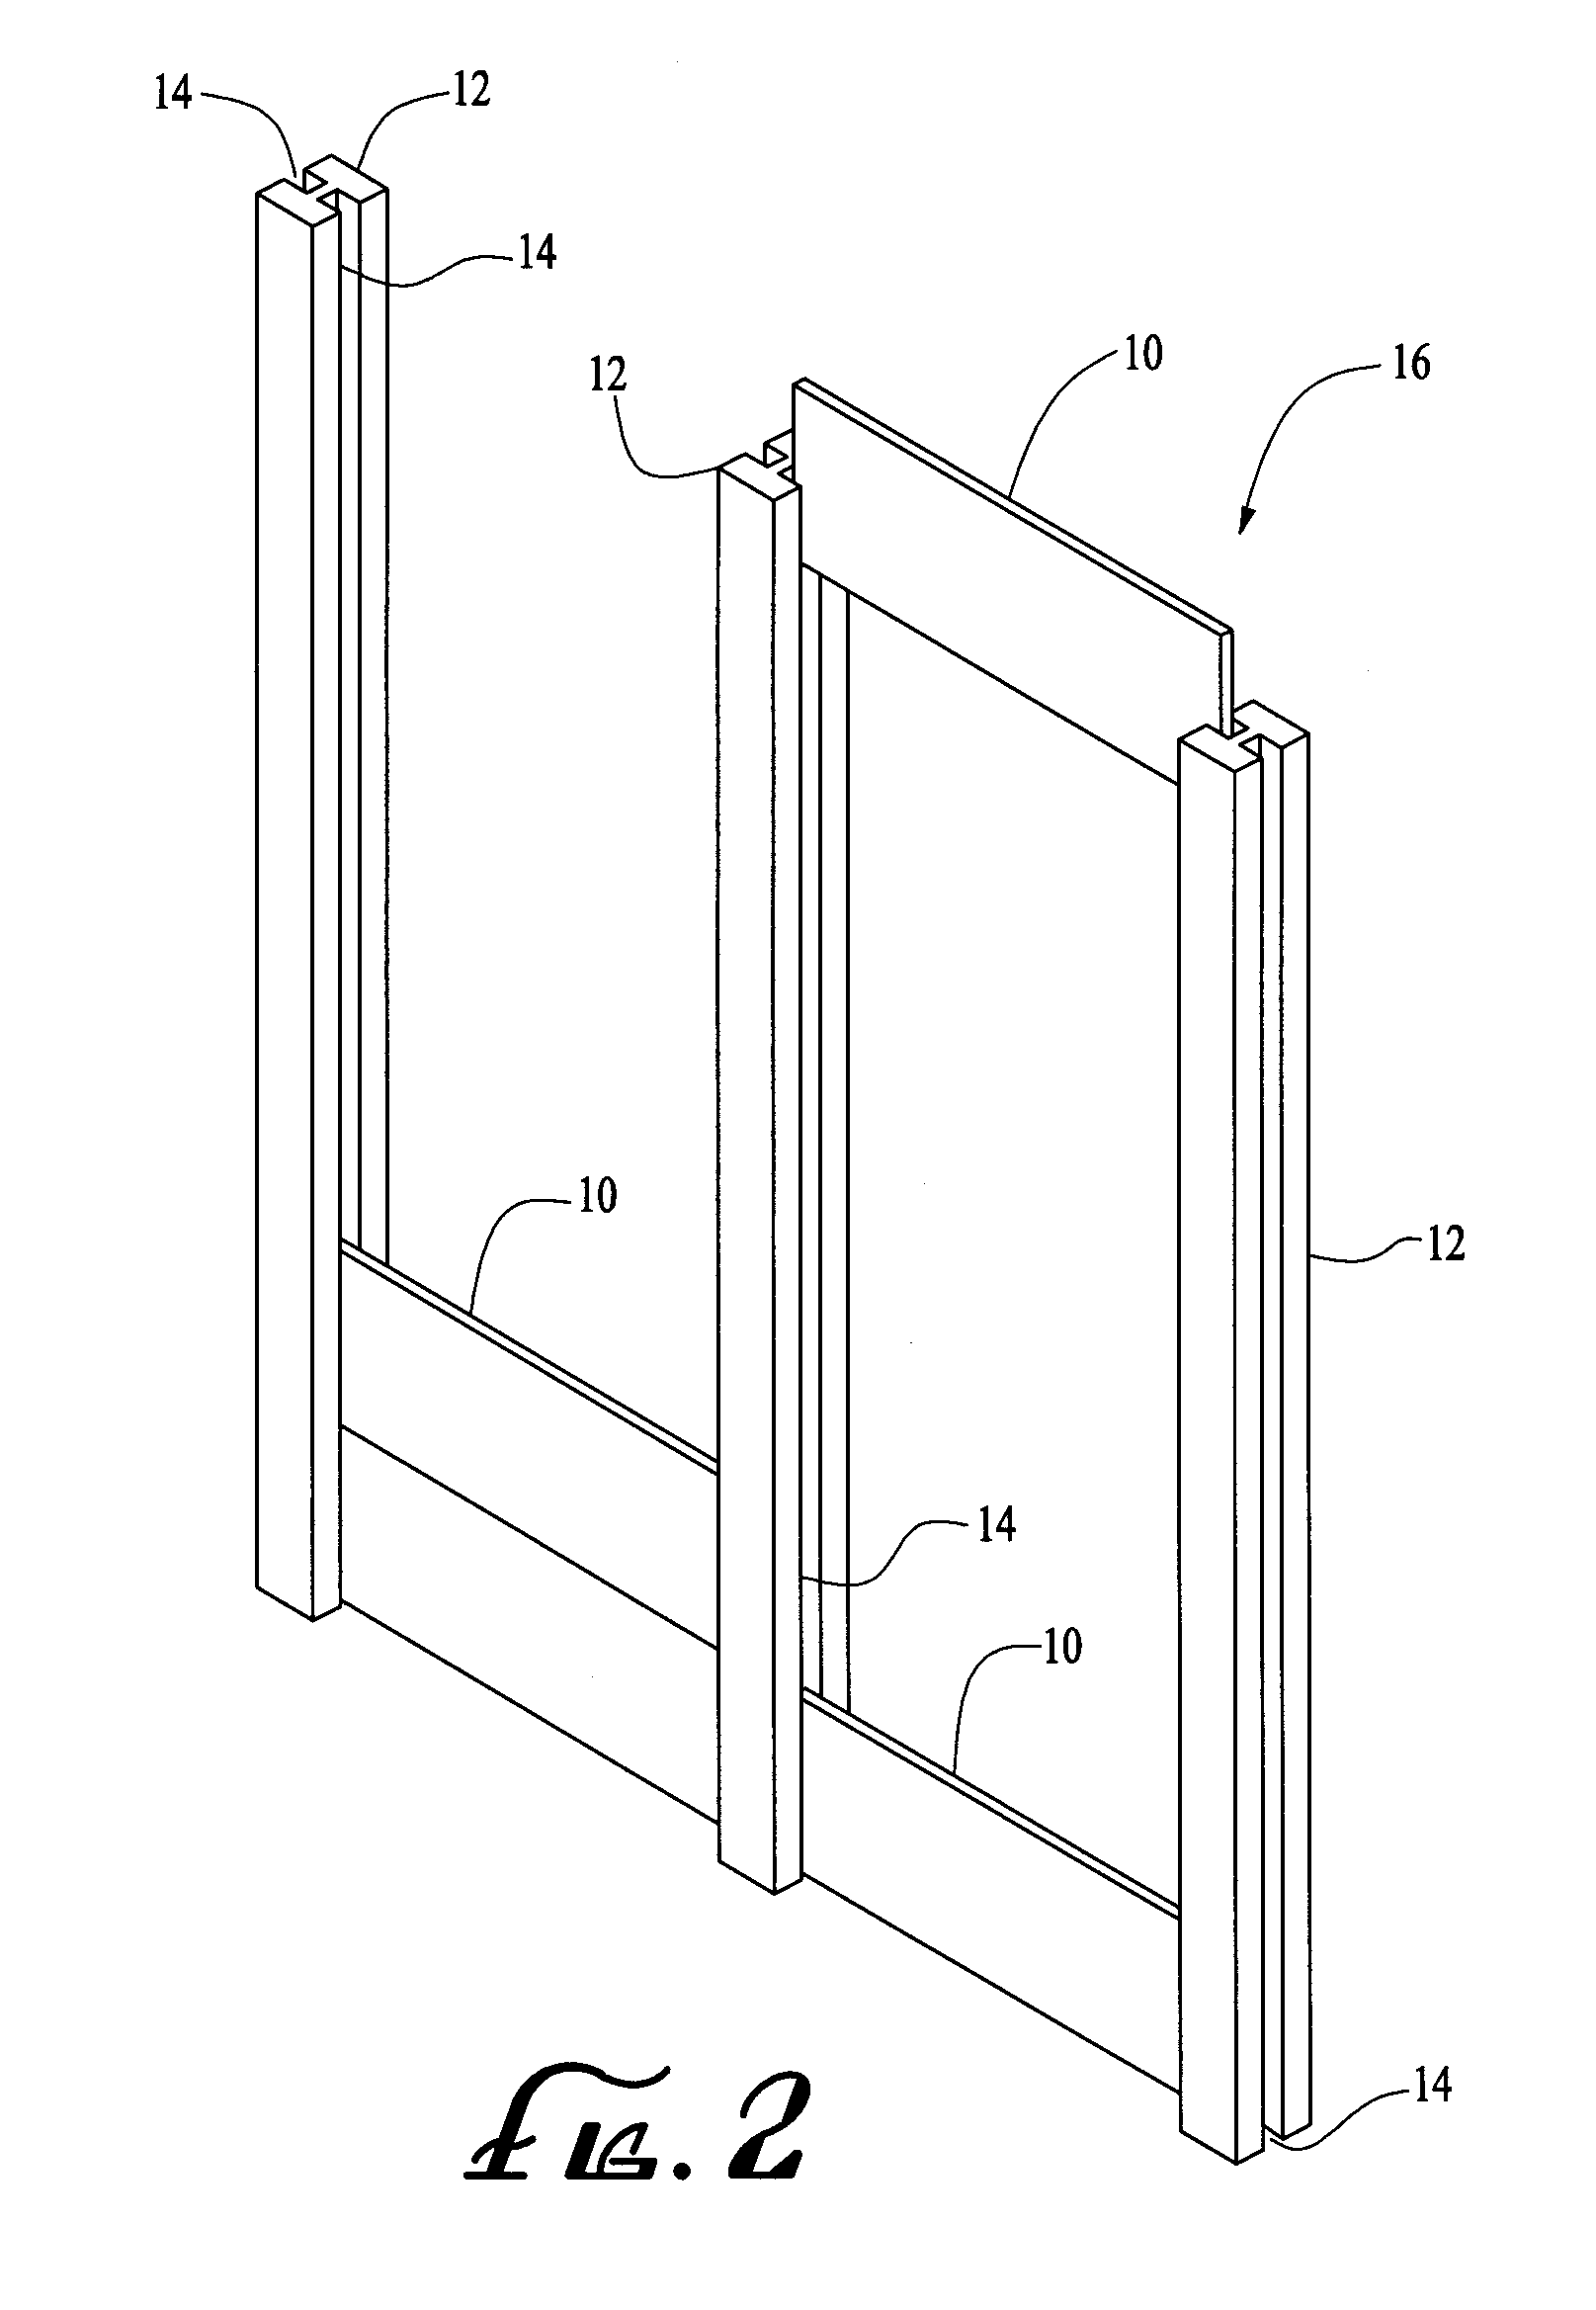 Refractory Material with Stainless Steel and Organic Fibers